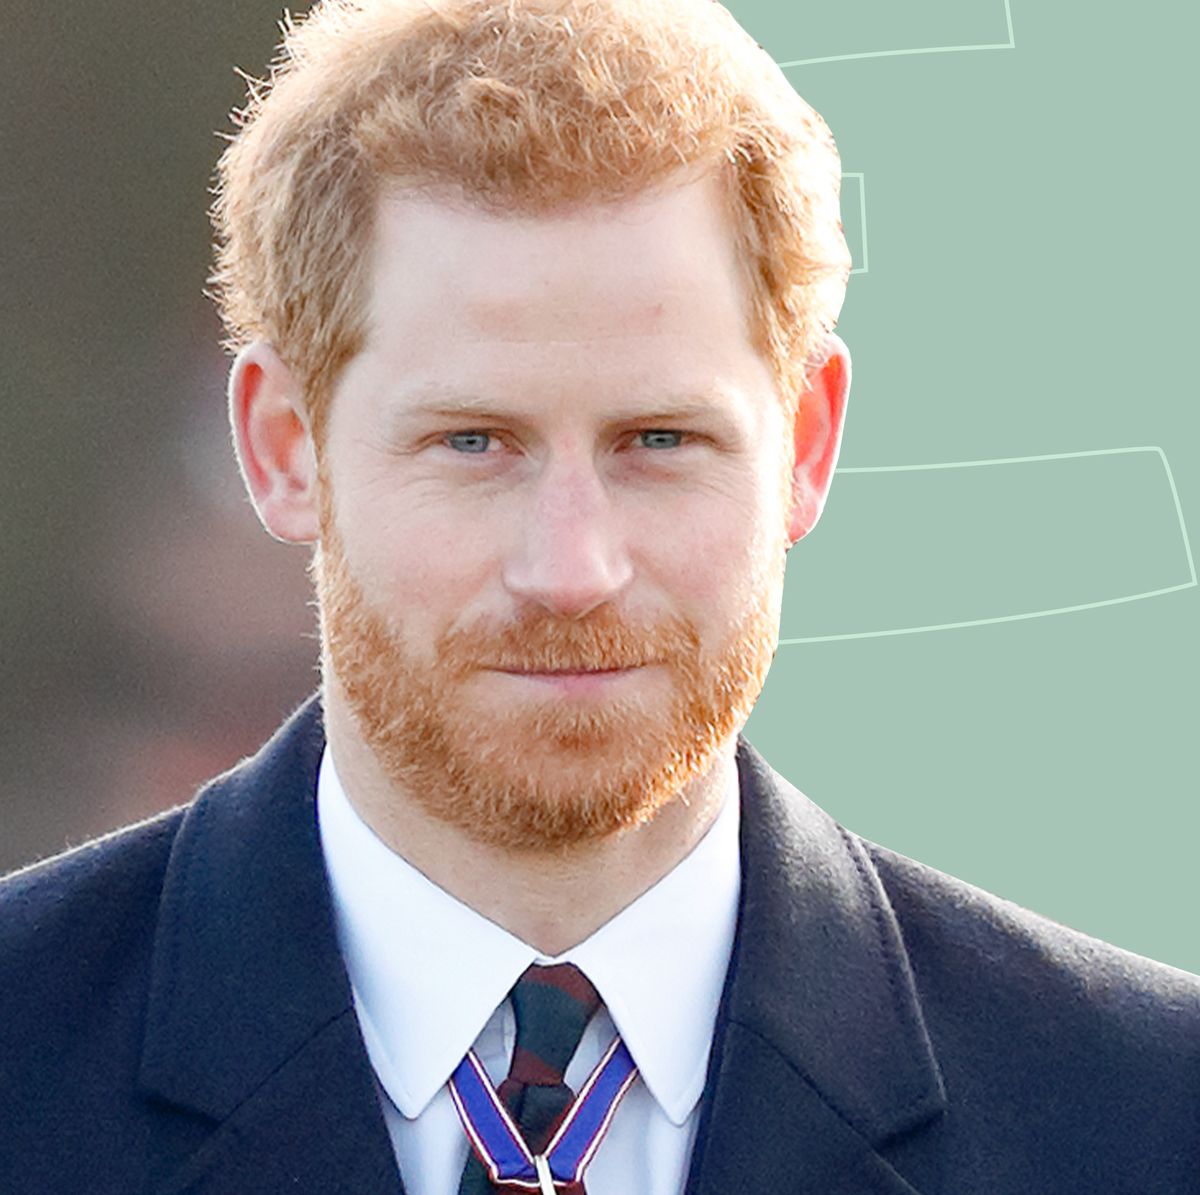 Spare,” Reviewed: The Haunting of Prince Harry